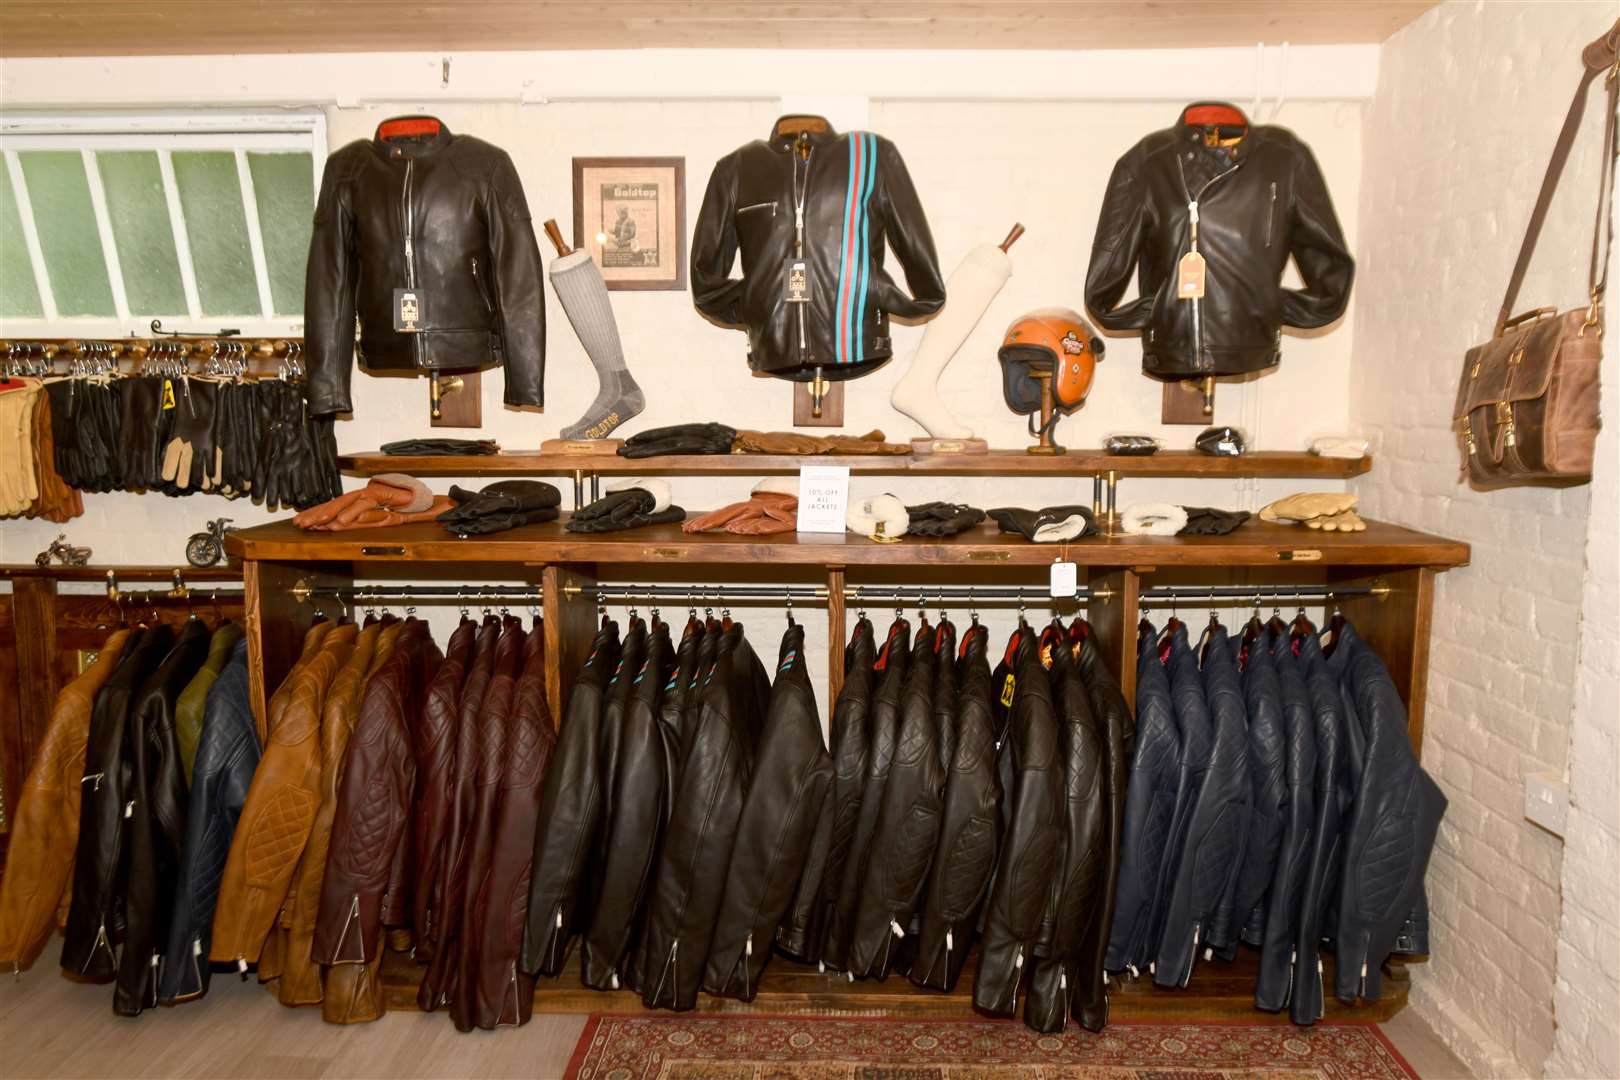 Goldtop motorcycle outfitters is a specialist in leather jackets, boots, gloves and gauntlets for men and women. Picture: Vikki Lince